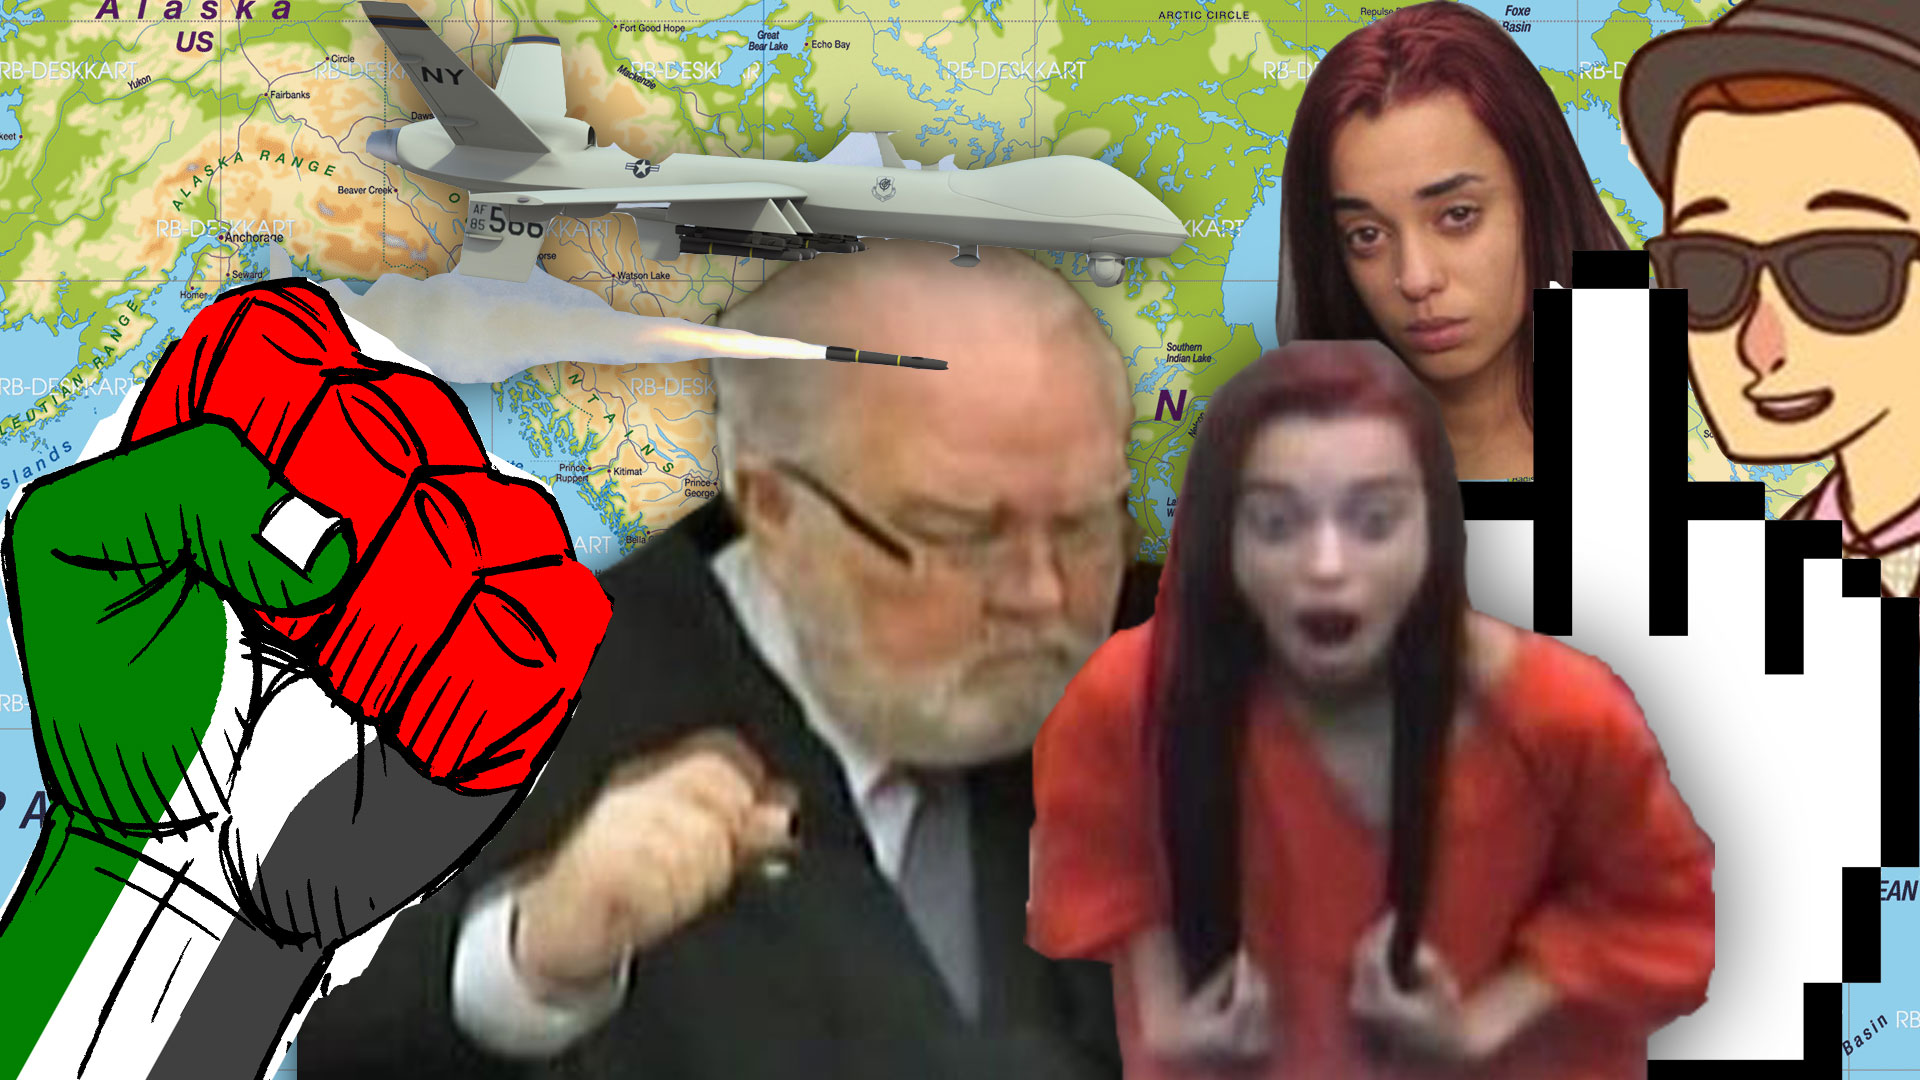 Girl Flips Bird to Judge & Drones Can Kill Americans